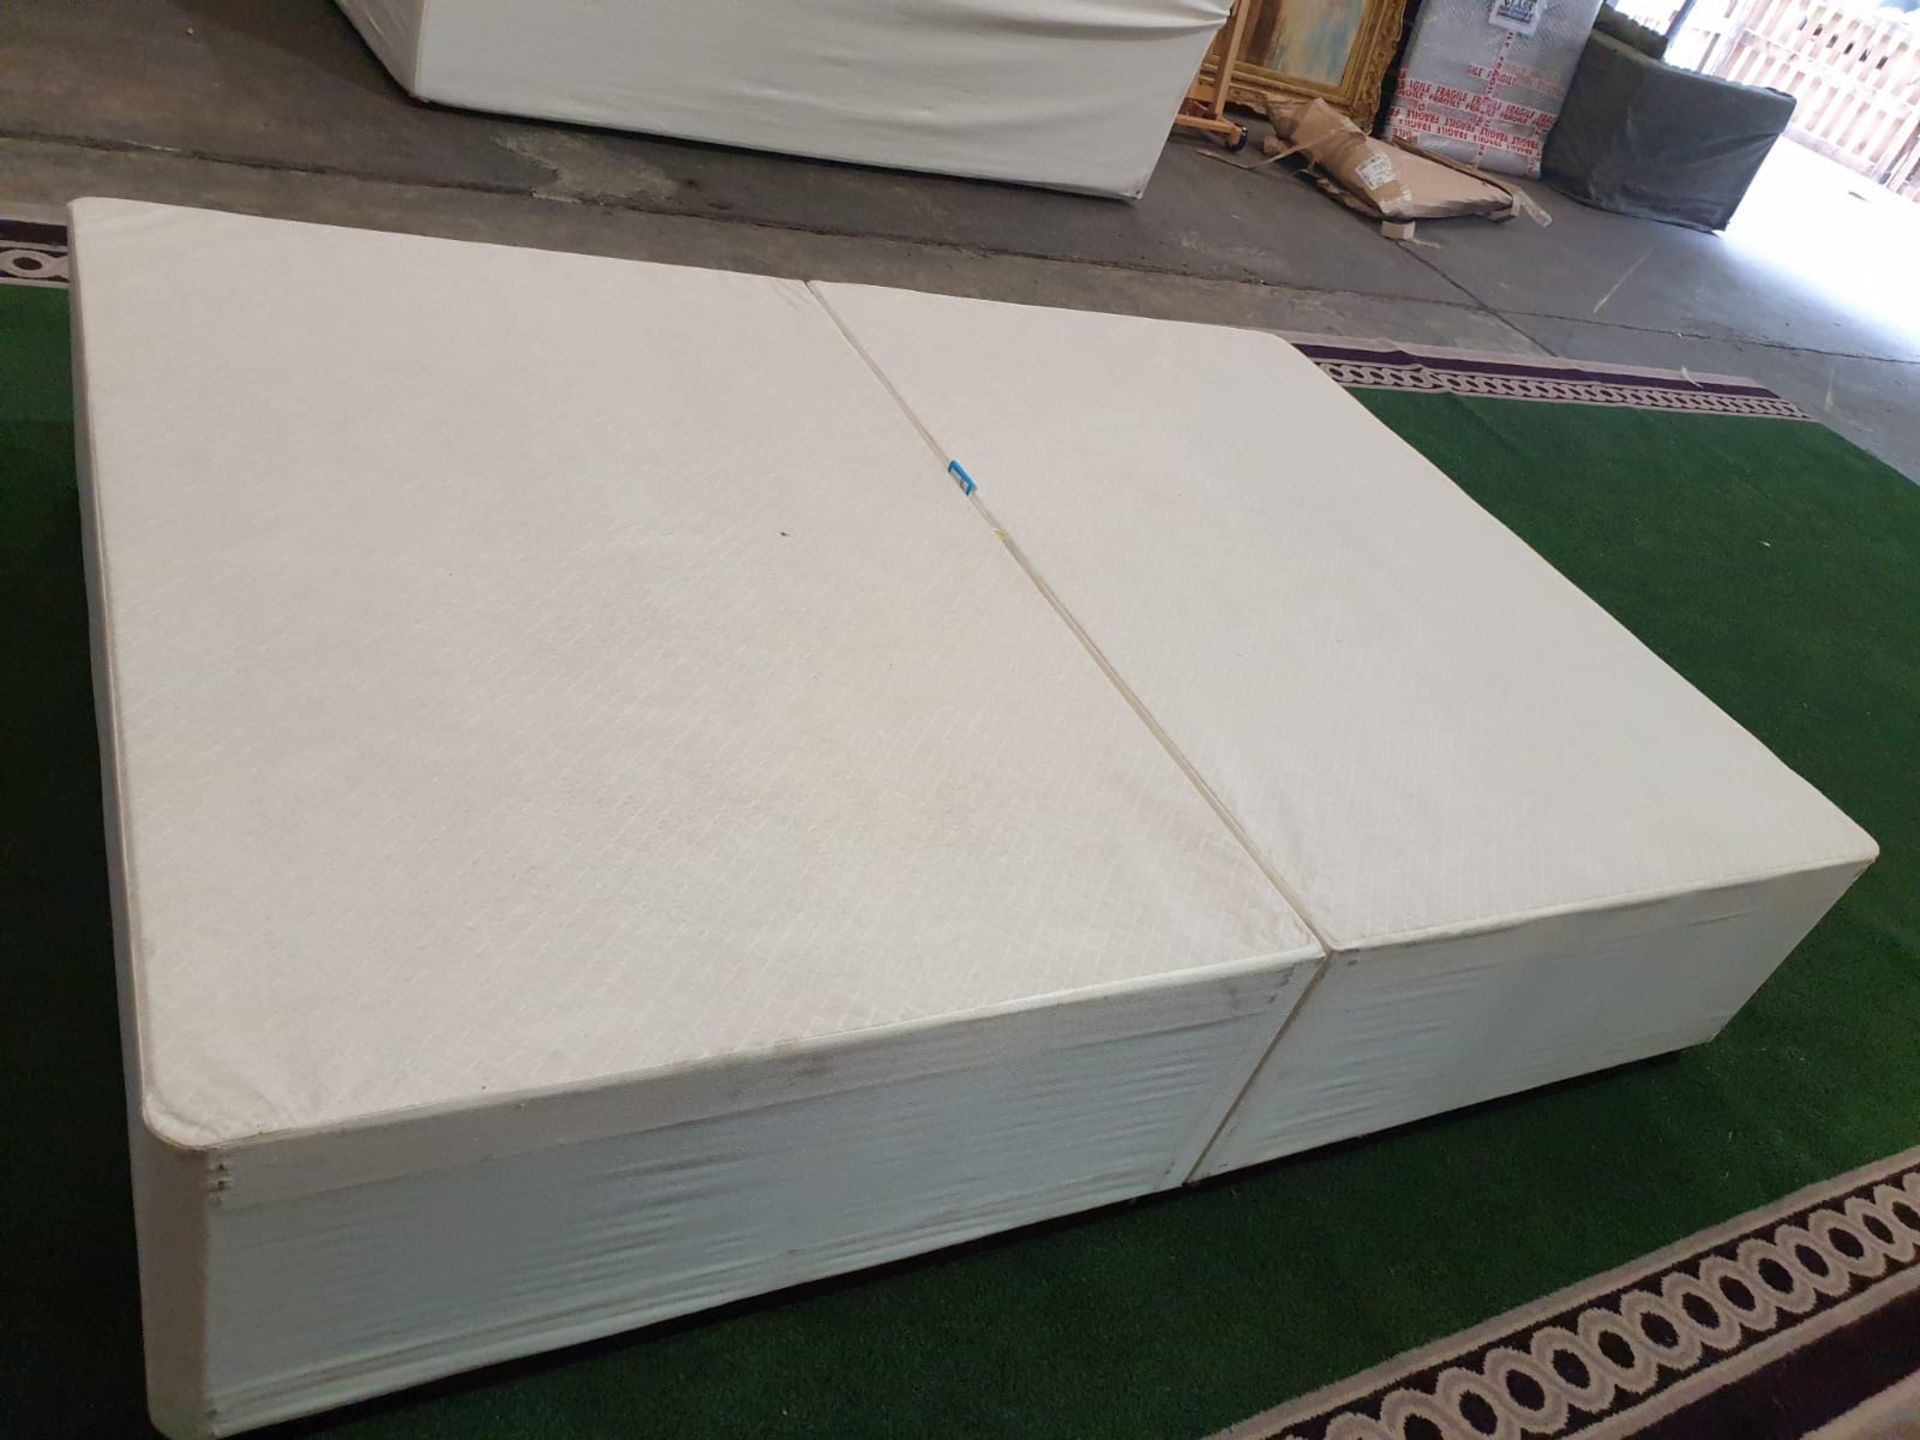 4FT6 Double Bed Base Divan Cream (ST29) - Image 2 of 3